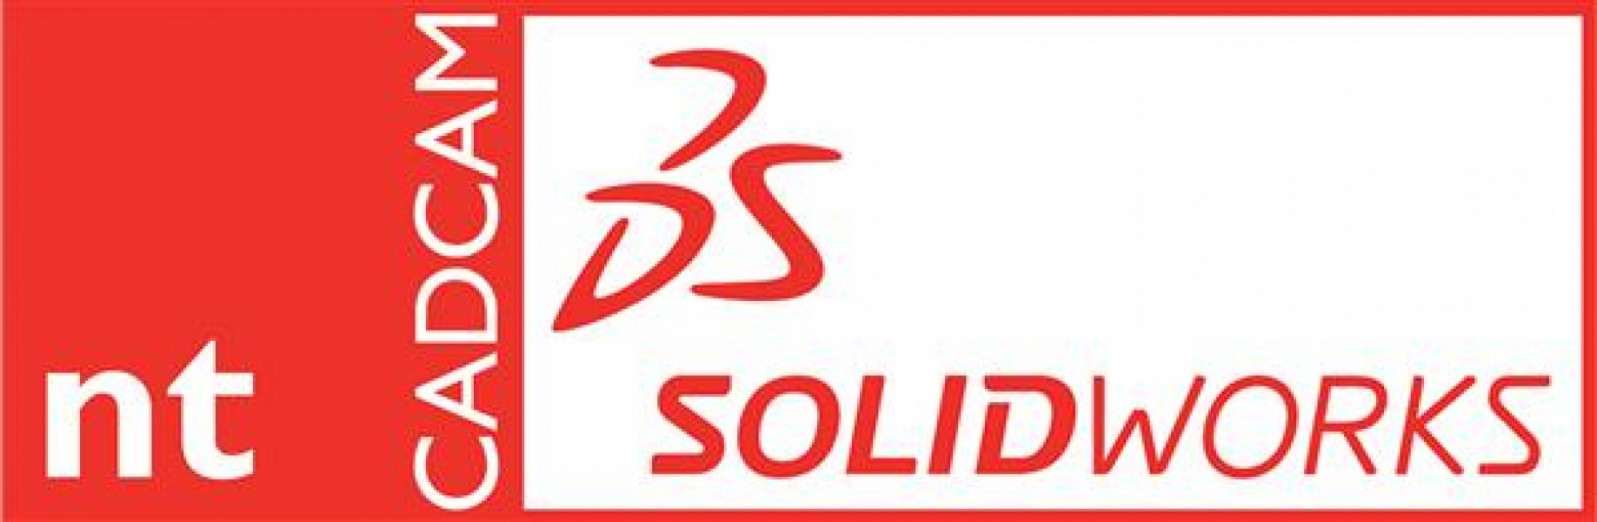 Introduction to SolidWorks - Web Demonstration